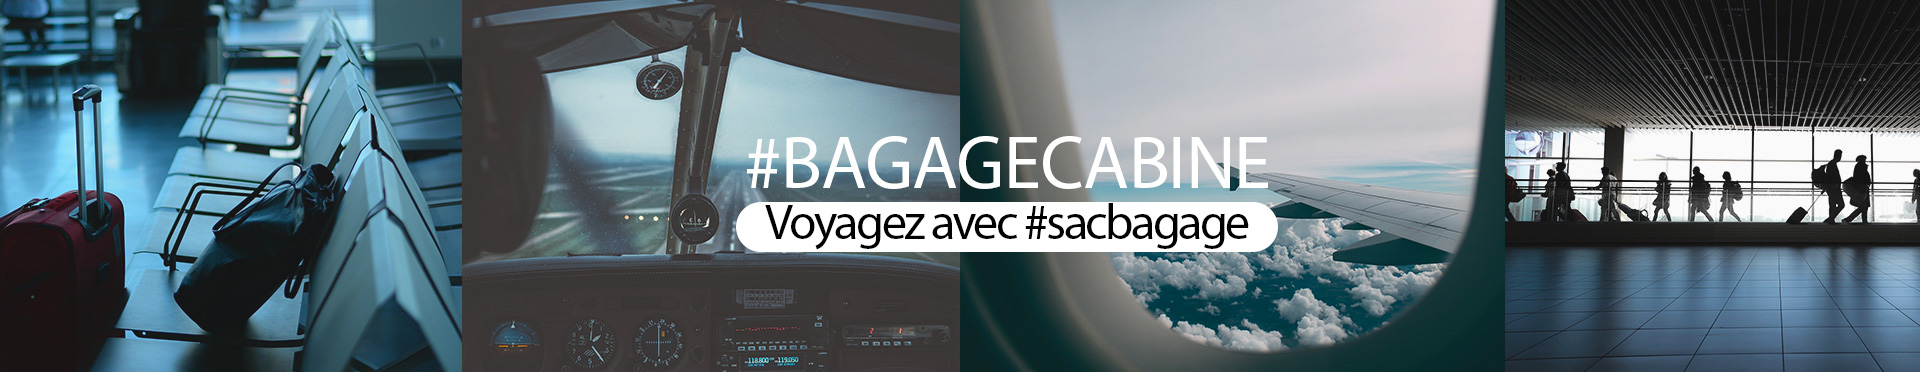 bagage cabine